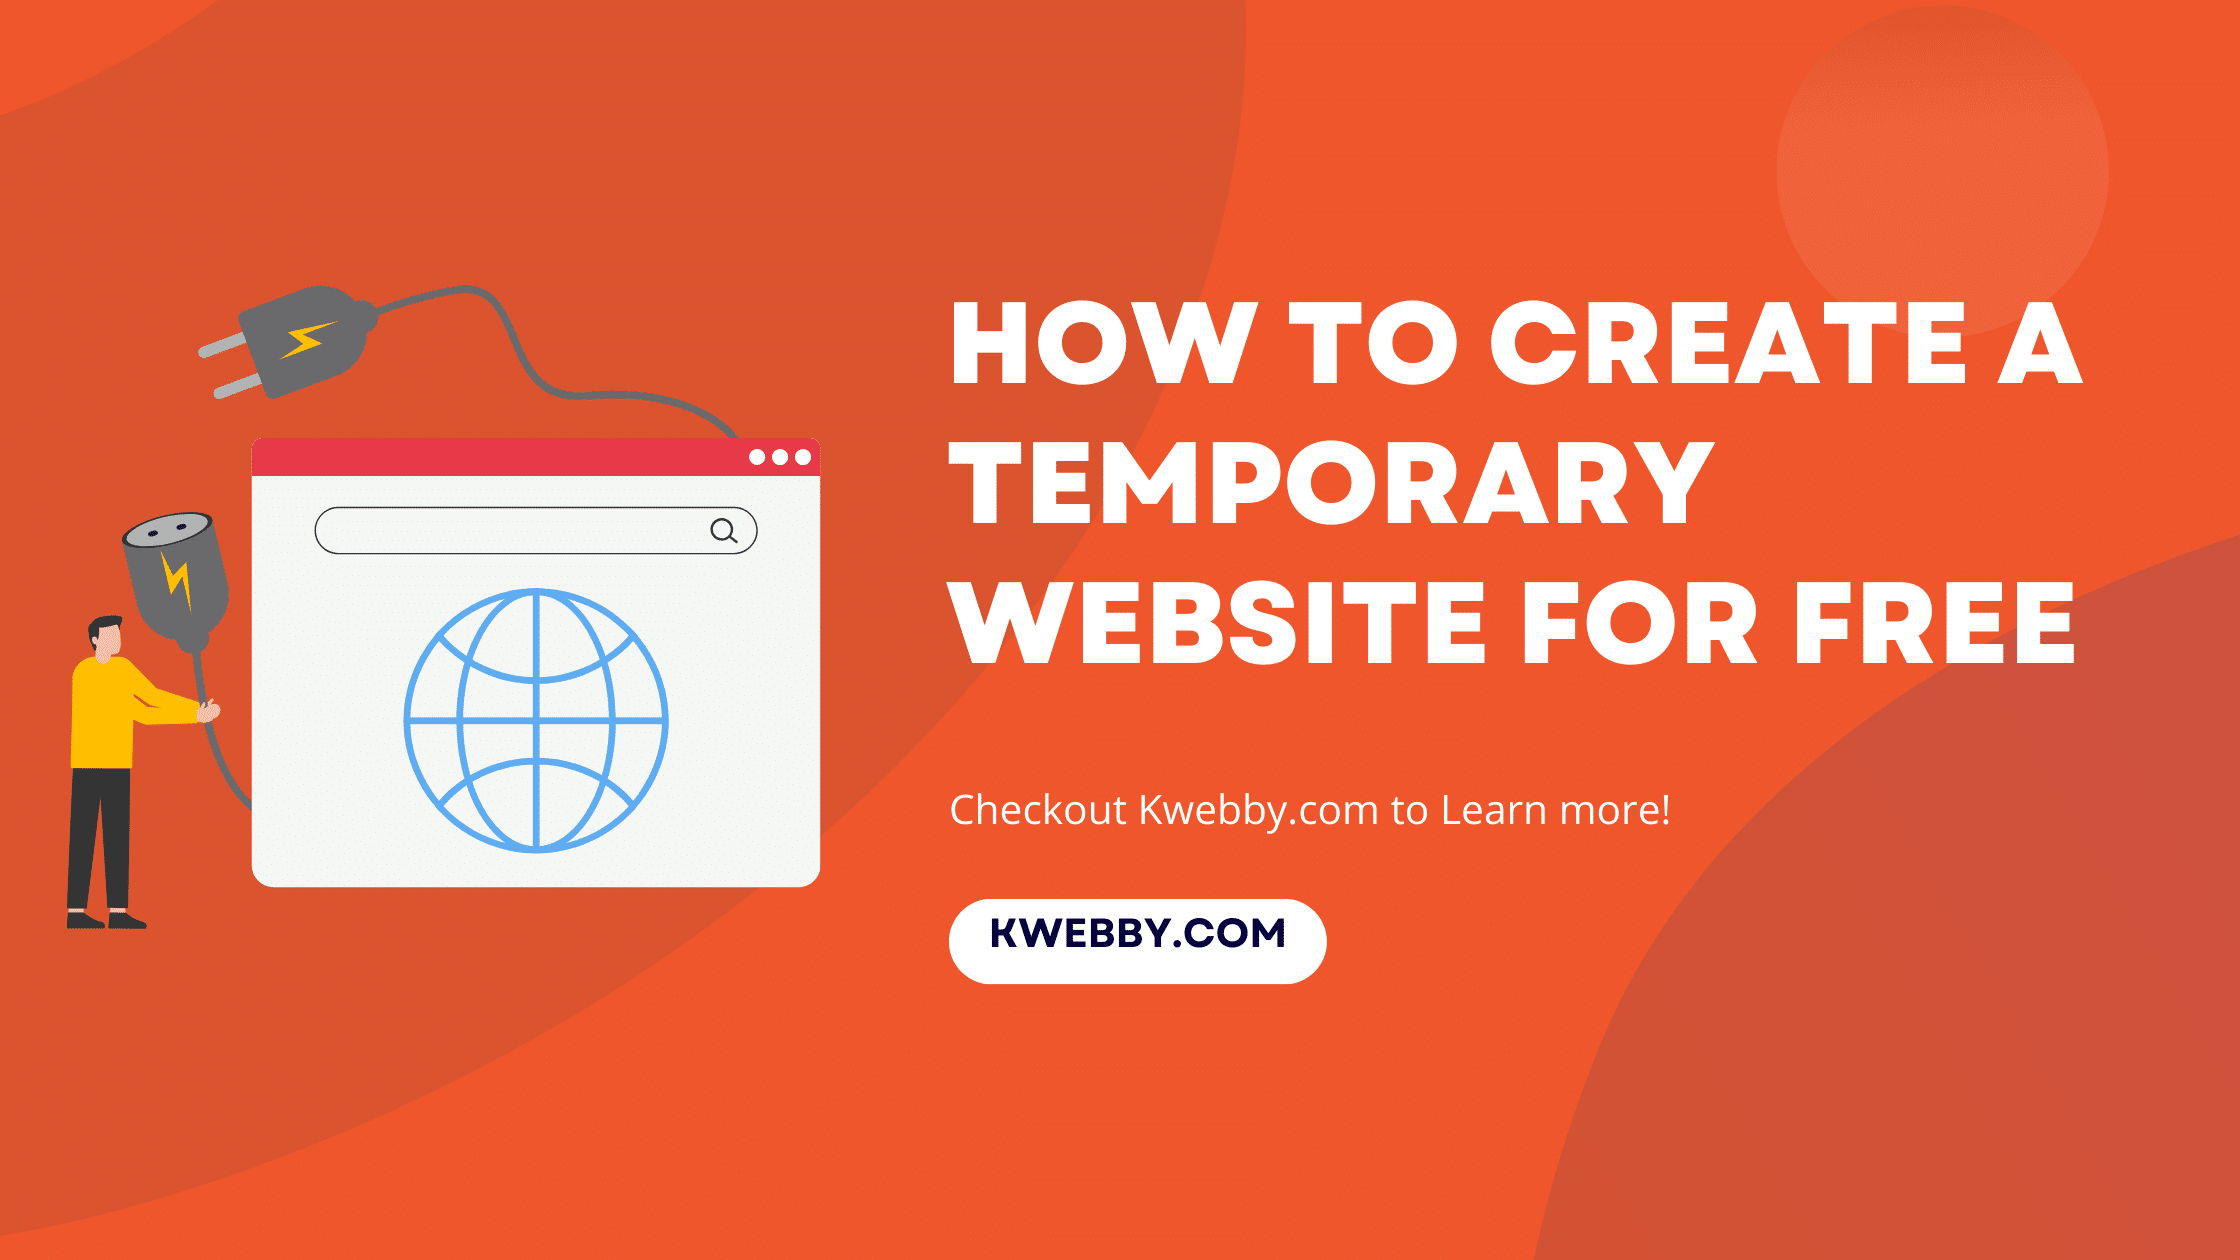 How to Create a Temporary Website for Free